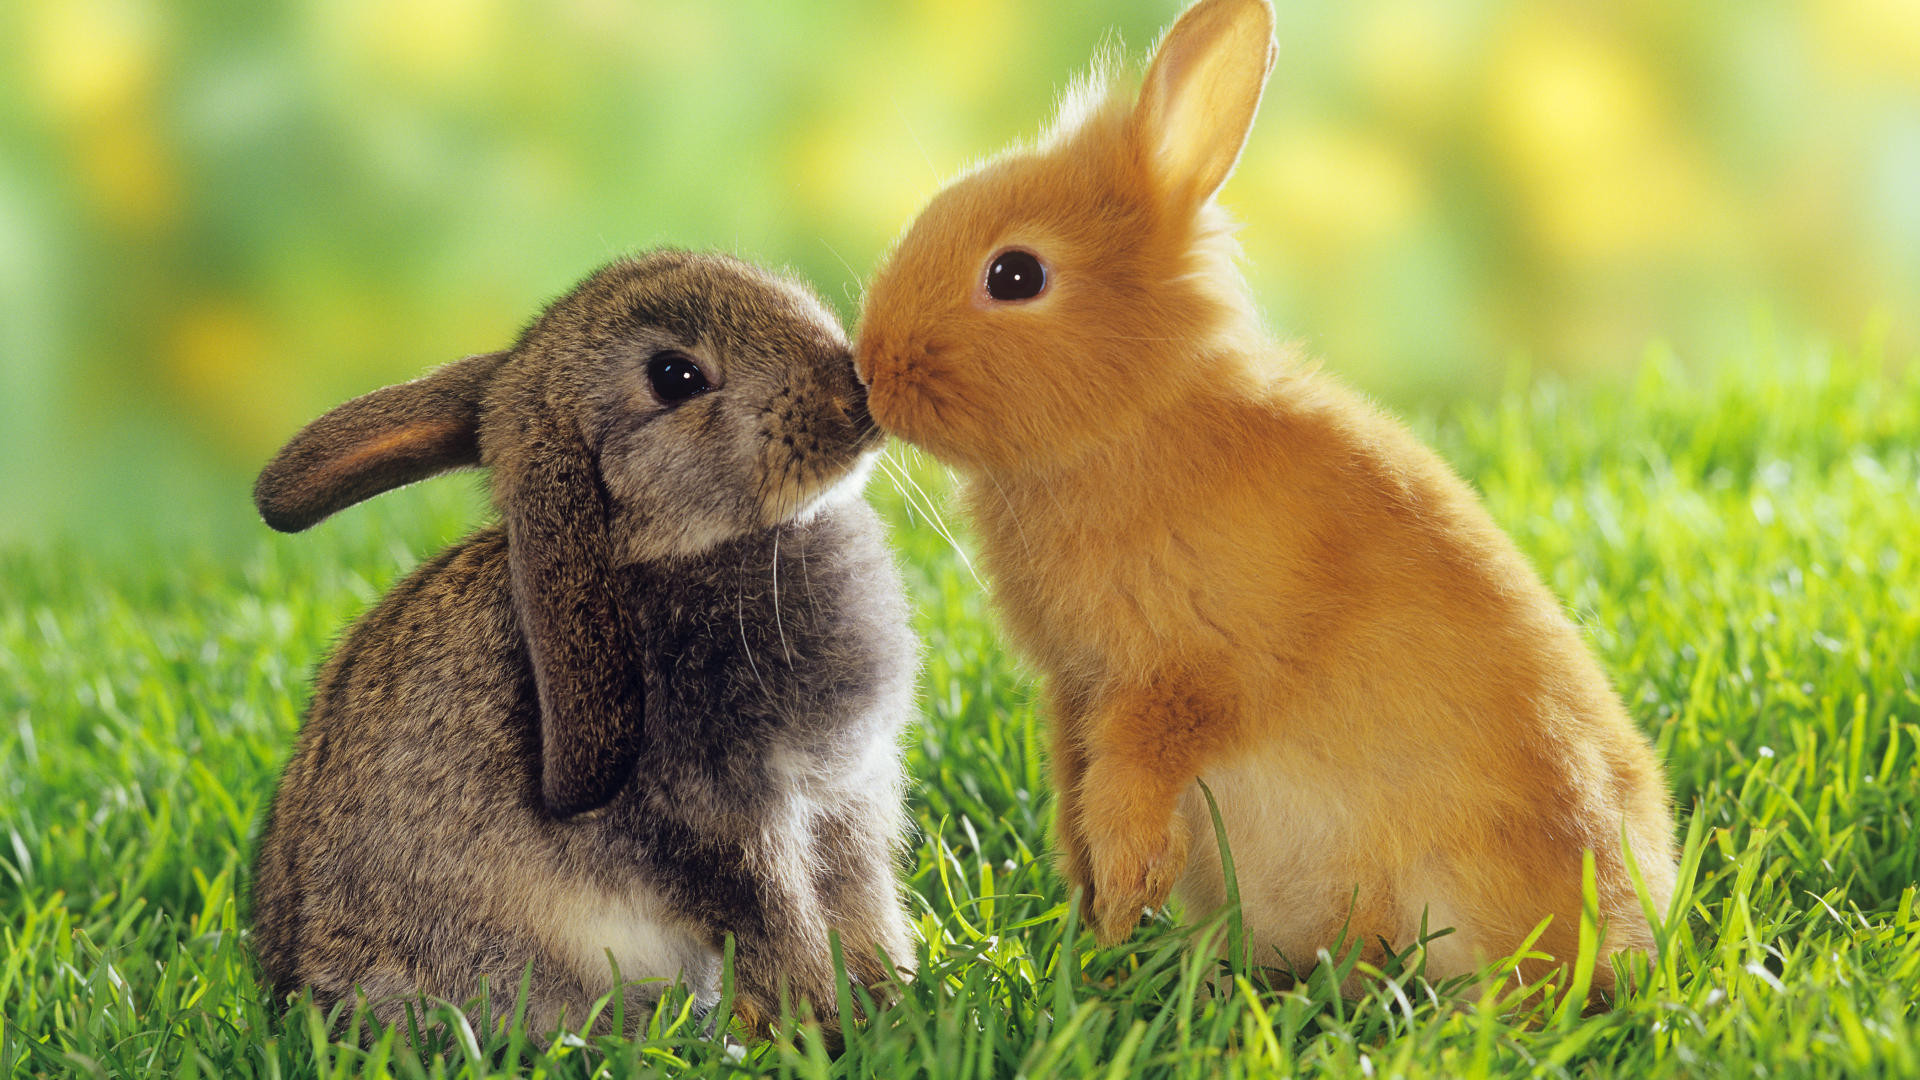  Browse Animals Cute Bunny Wallpaper 1920x1080 Full HD Wallpapers